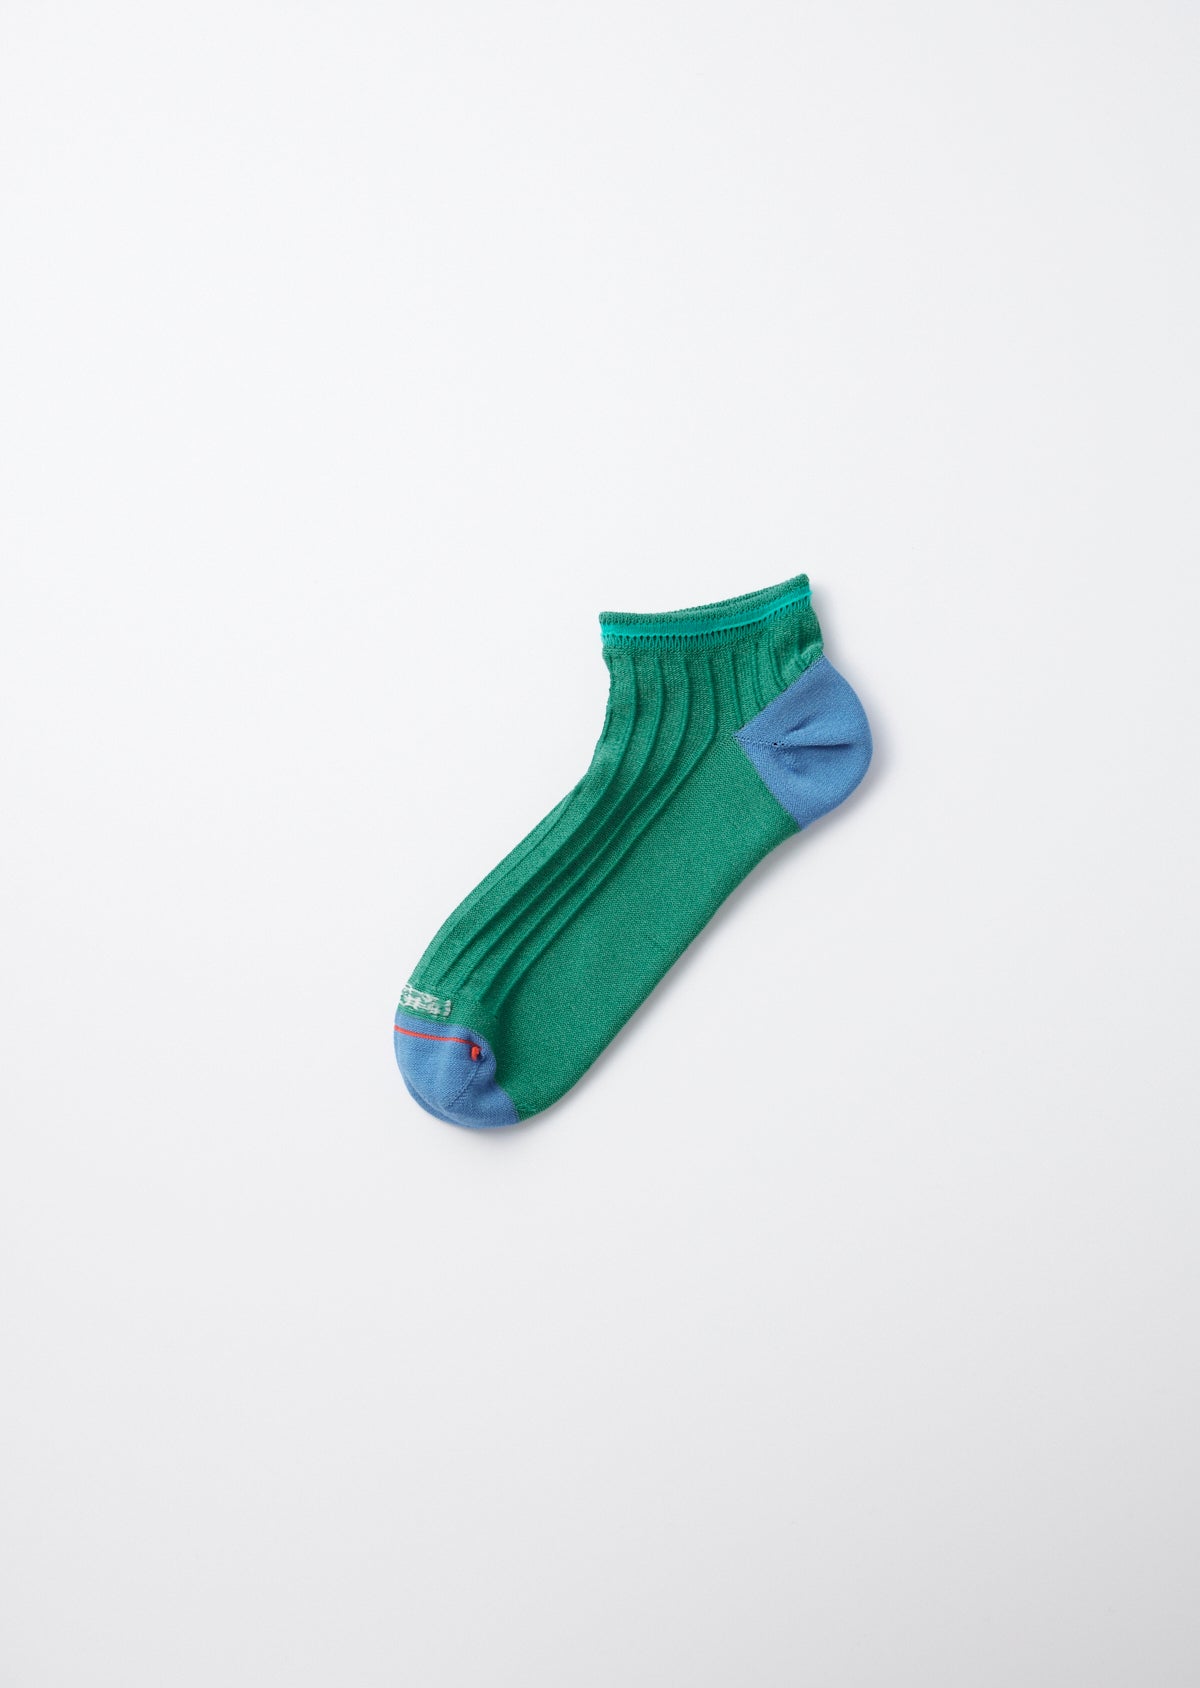 HYBRID ANKLE SOCKS ”ORGANIC COTTON ＆ RECYCLE POLYESTER”